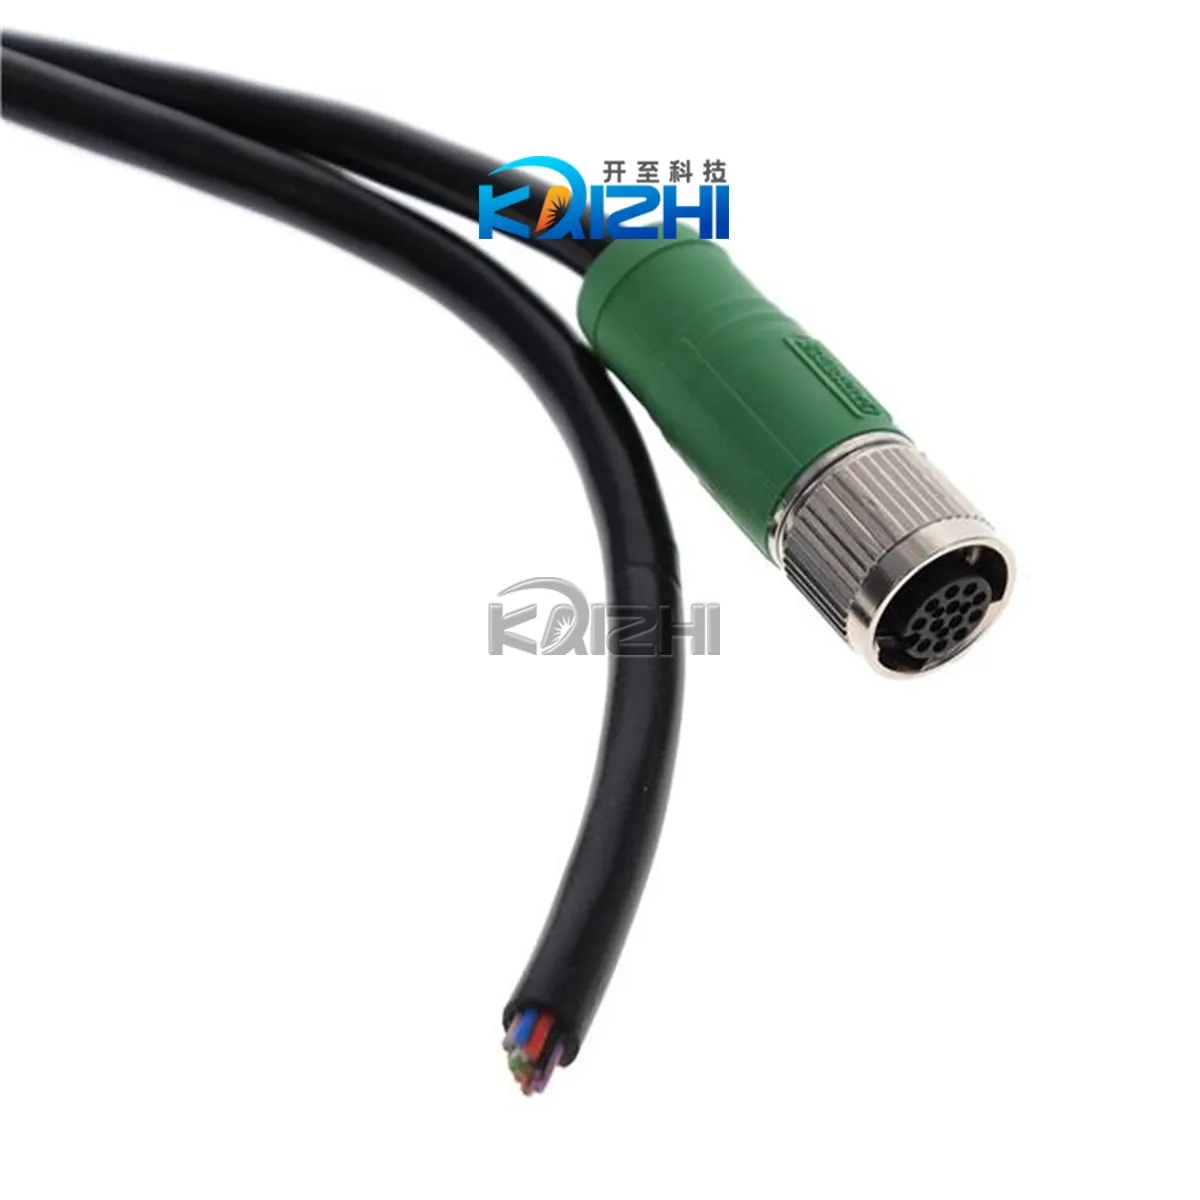 IN STOCK ORIGINAL BRAND CABLE CIRCLE 12POS FEM TO WIRE 4.92' 1554856